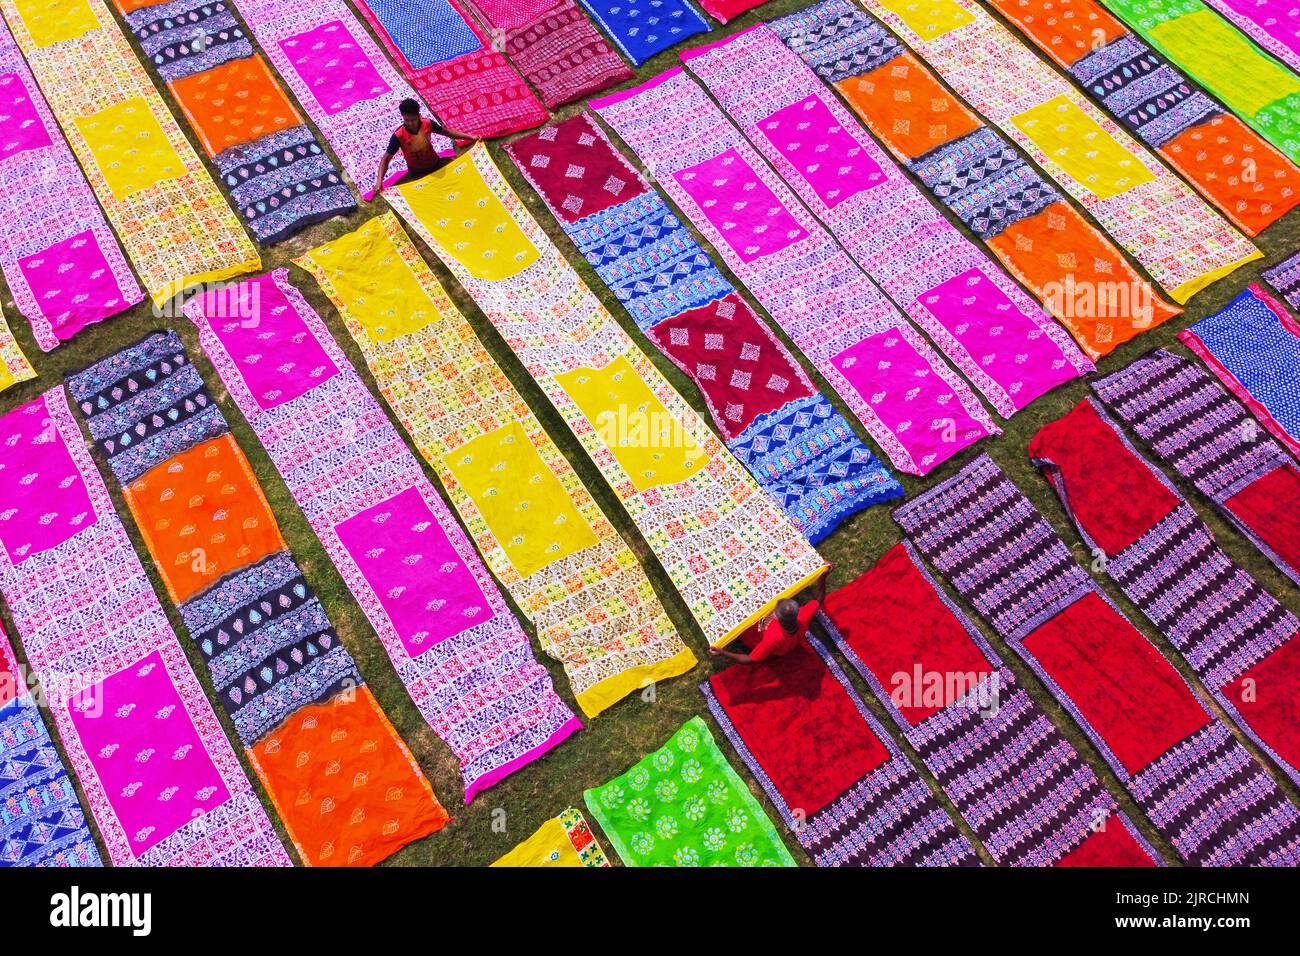 Narayanganj, Bangladesh. 23rd Aug, 2022. Colorful strips of fabric produce an eye-catching display as they are laid out in neat rows across a field in Narayanganj, Bangladesh. Locally called ''Saree'' - a traditional clothing garment for women, the long cotton cloths are set out to dry under the hot sun, having been dyed with bright colours. About 4000 pieces of cloth are laid to dry here everyday. The process usually takes three hours, with each set of 200 pieces at a time to dry in temperatures that can reach over 36 degrees celsius. Beautifully embellished colorful long cloths are created Stock Photo